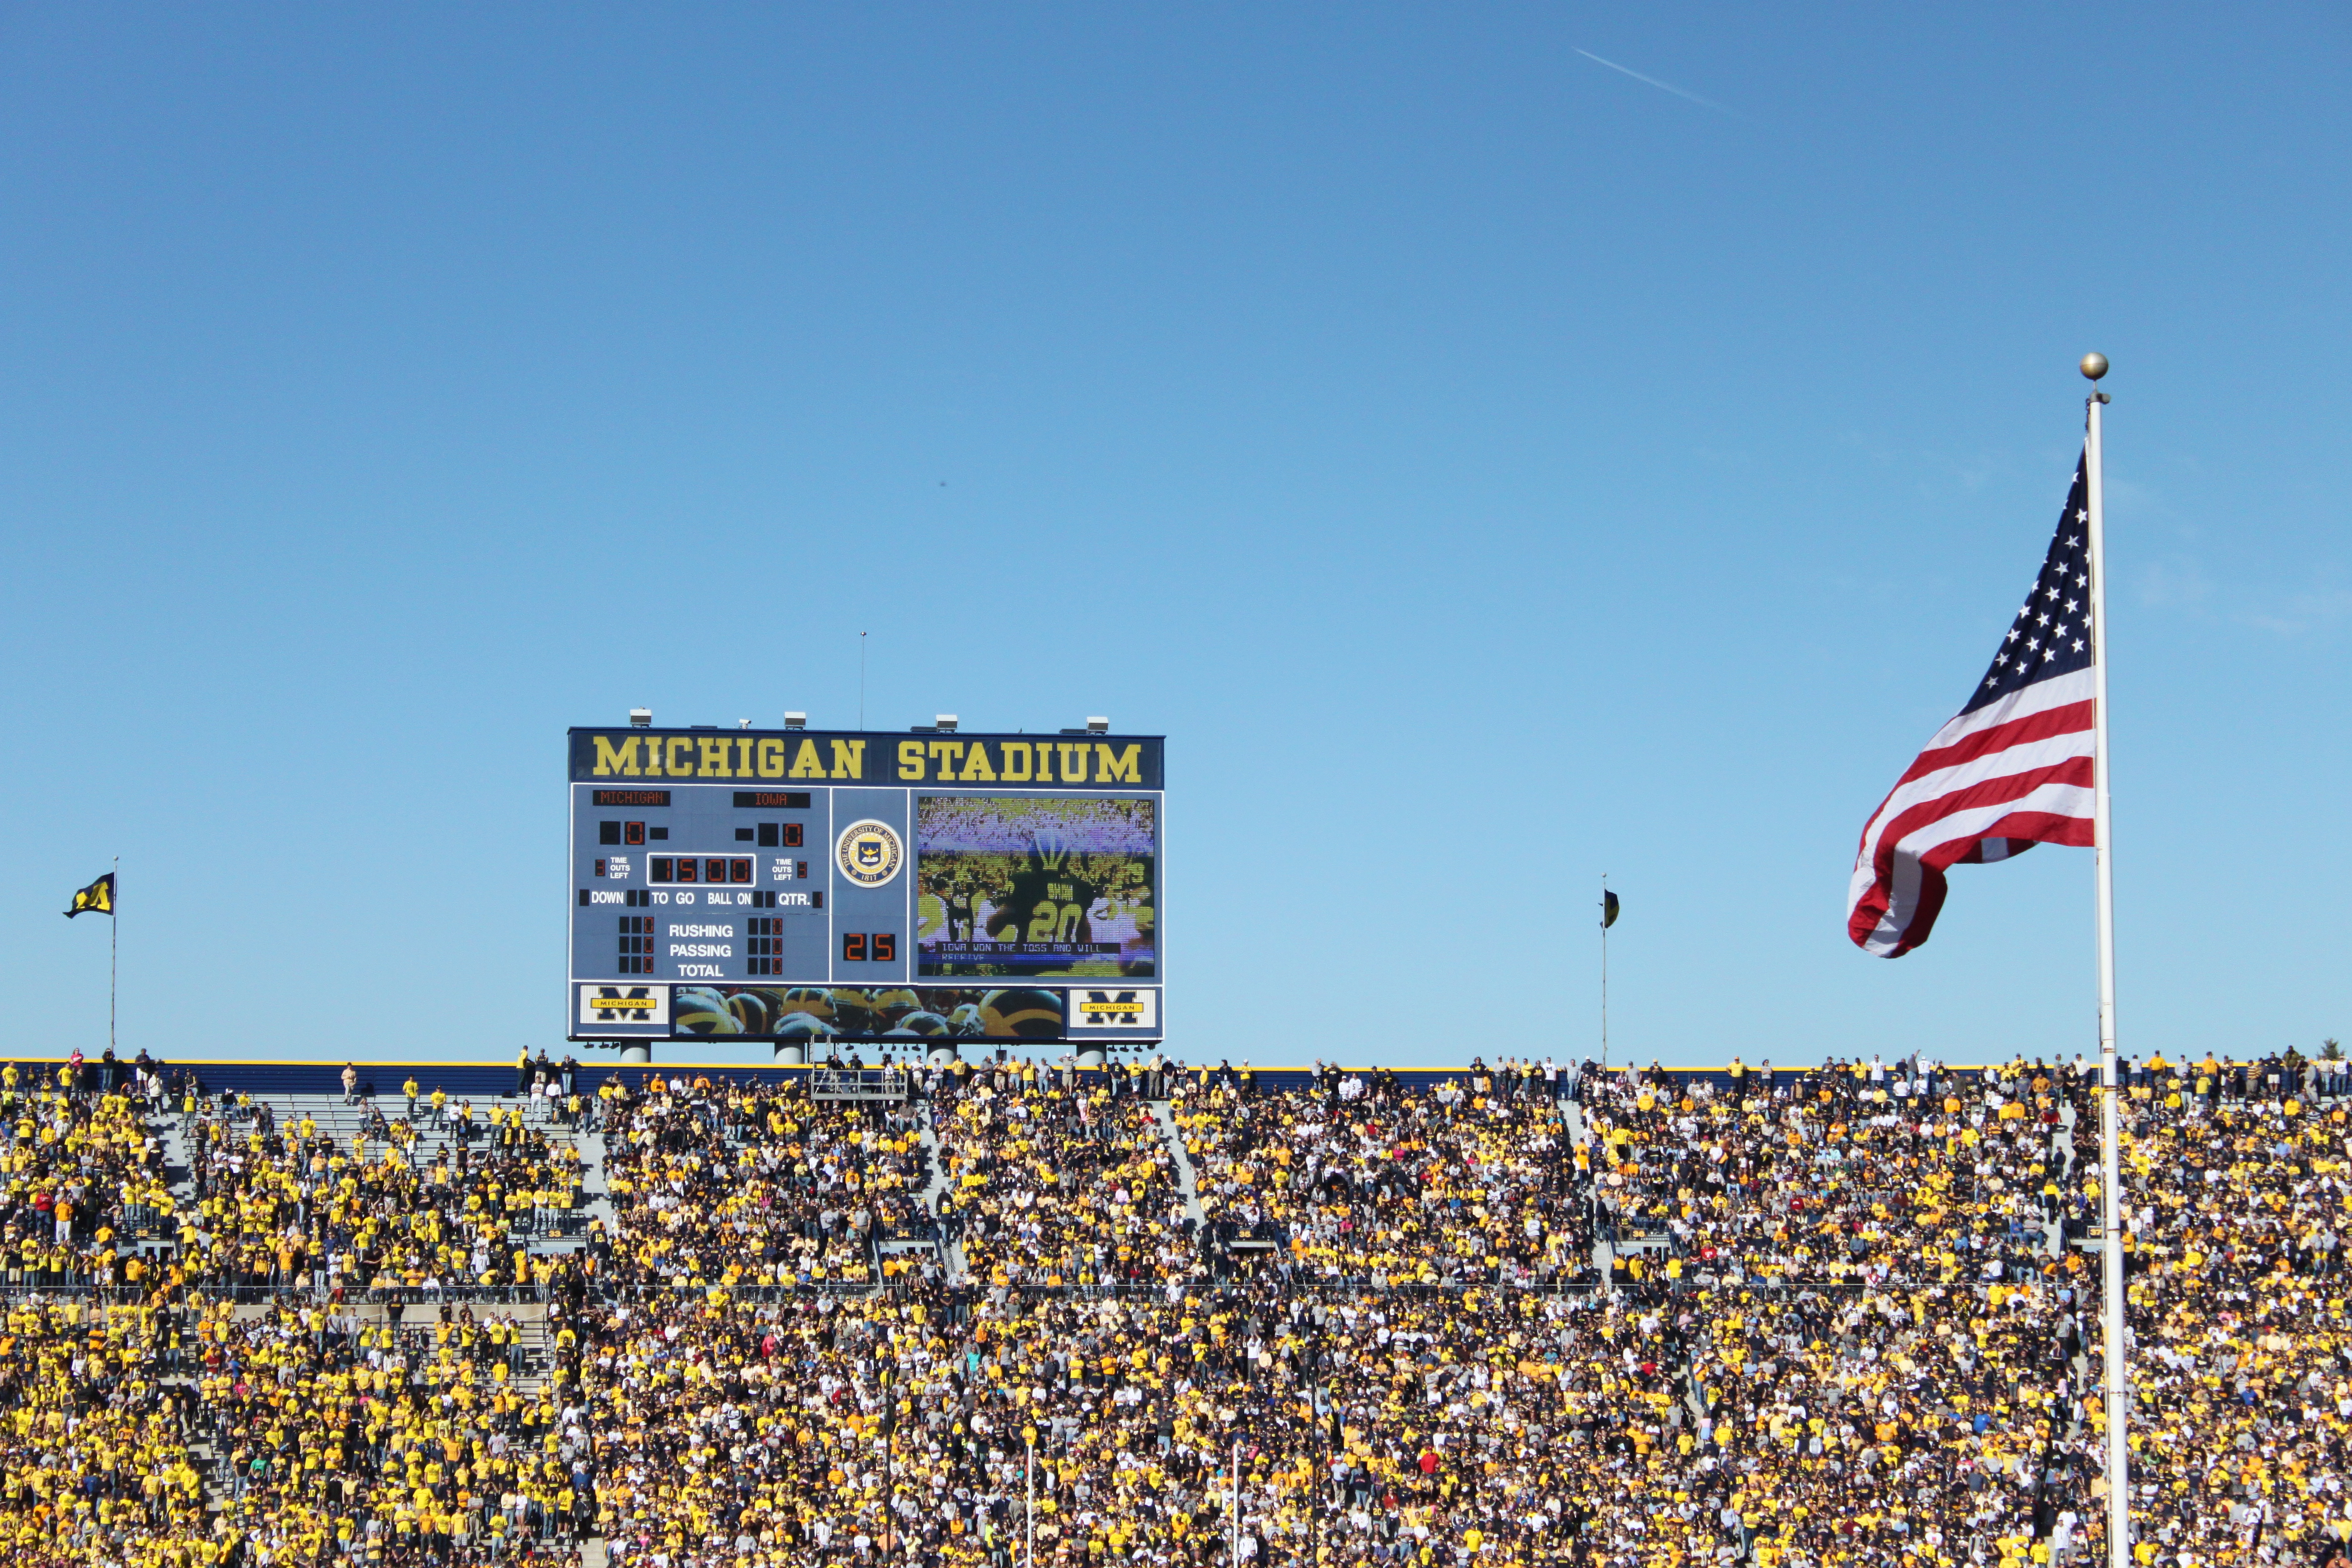 The Big House is the happiest place on Earth.